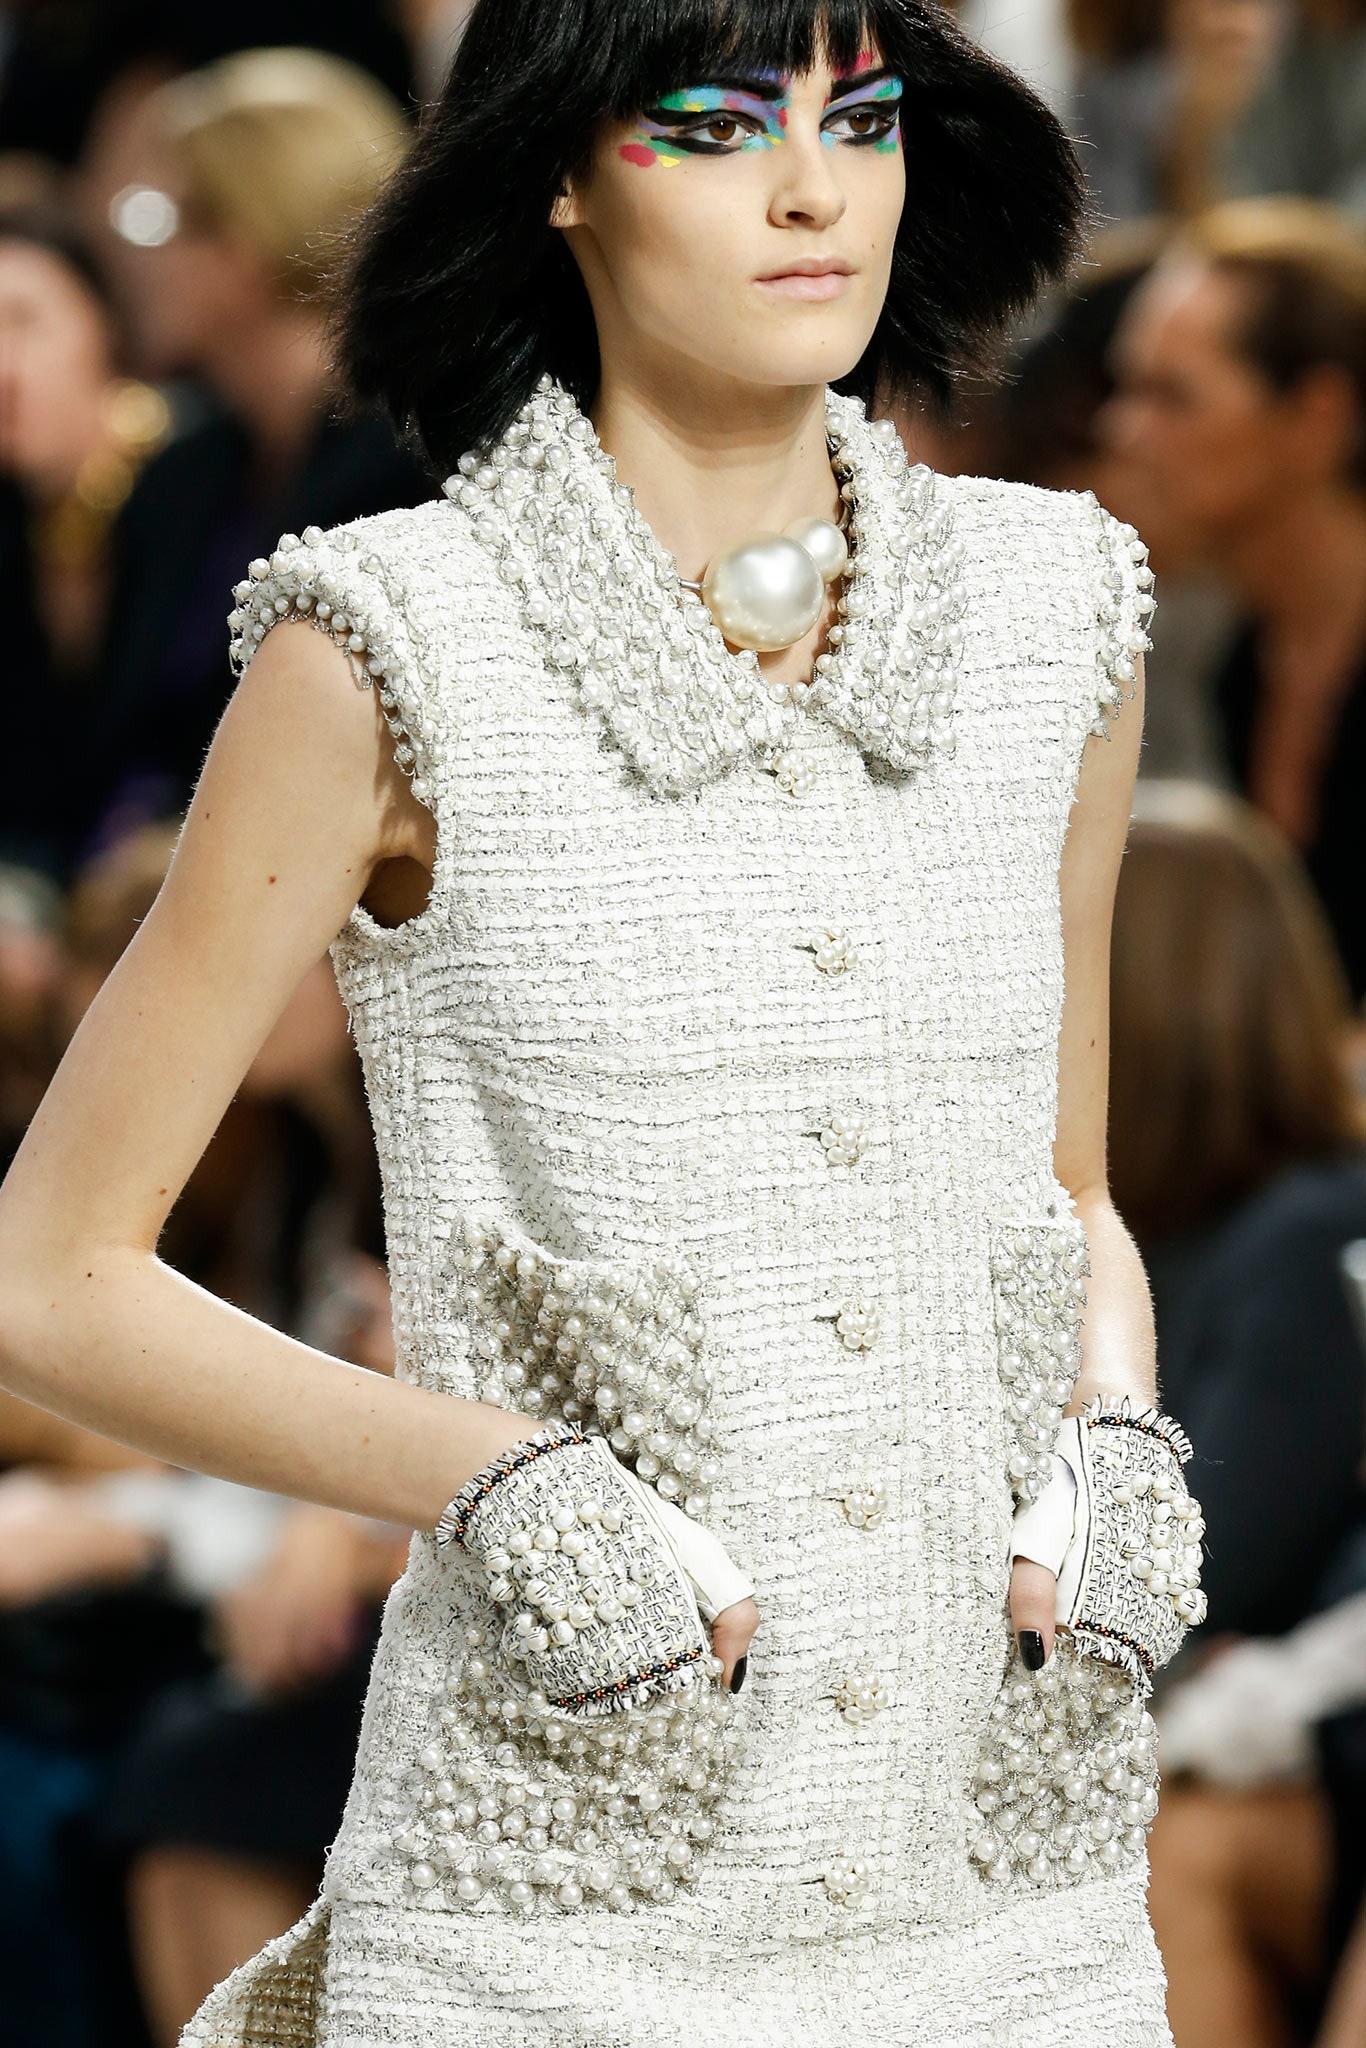 Stunning Chanel dress made of most precious ribbon tweed -- from Runway of 2014 Spring / Contemporary Art / Collection by Karl Lagerfeld.
Retail price was over 8,880$. Size mark 38 FR. Pristine condition.
- CC logo pearl buttons
- grey leather trim